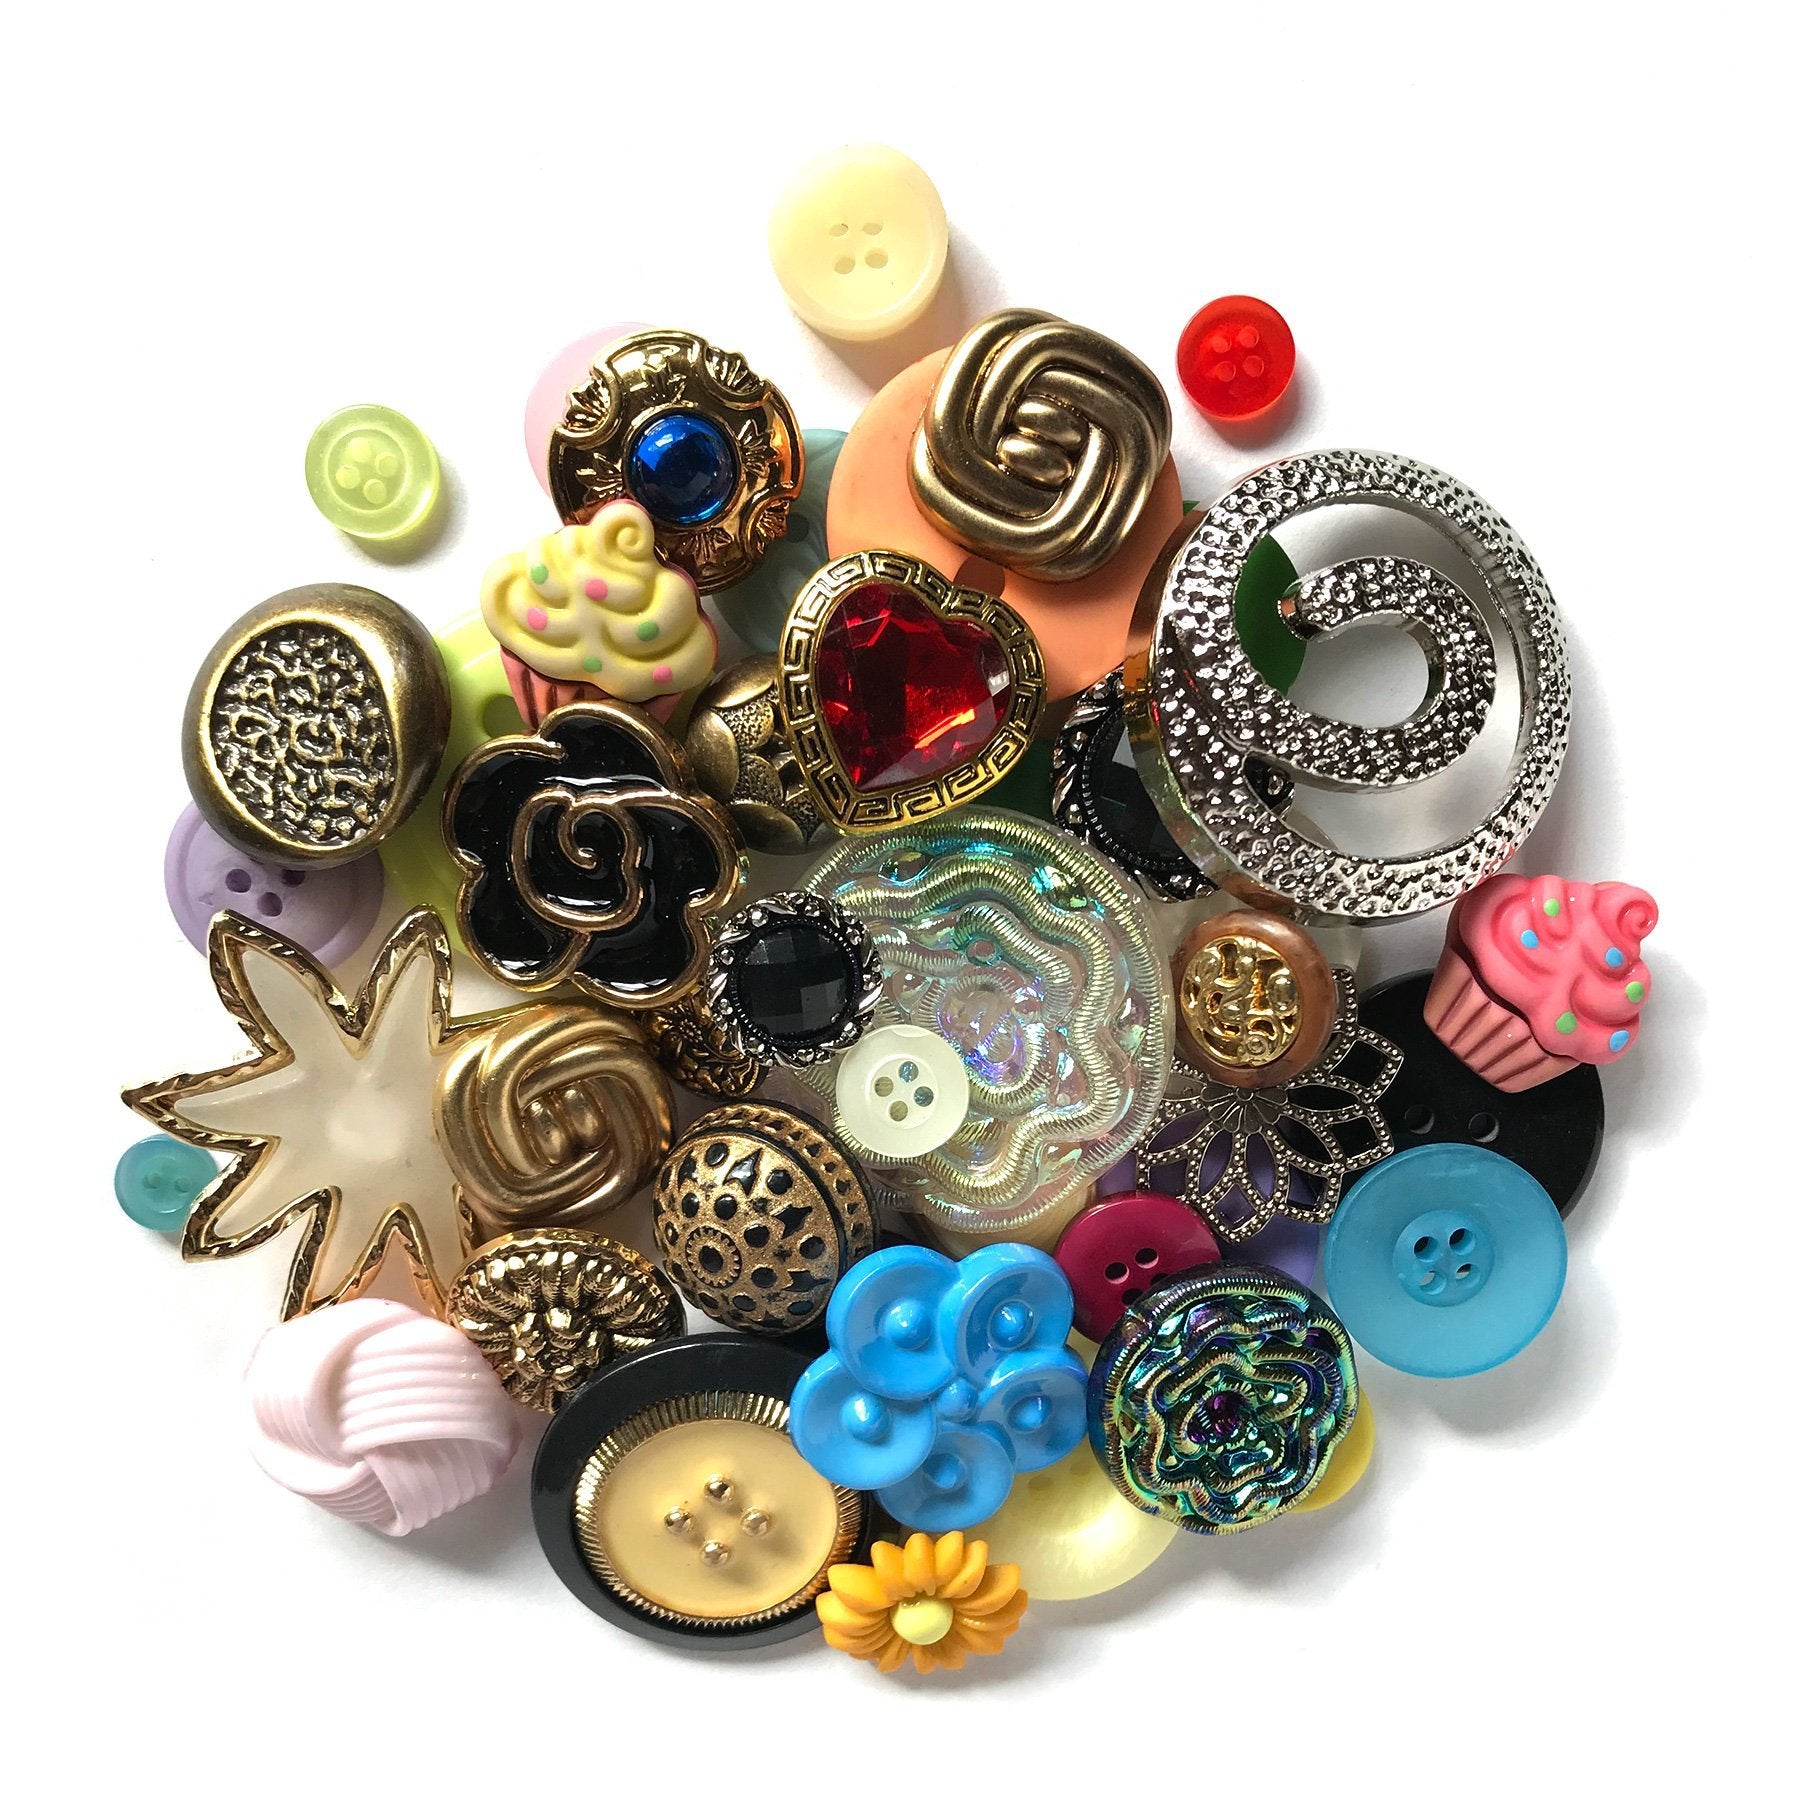 Assorted Buttons, Hobby Lobby